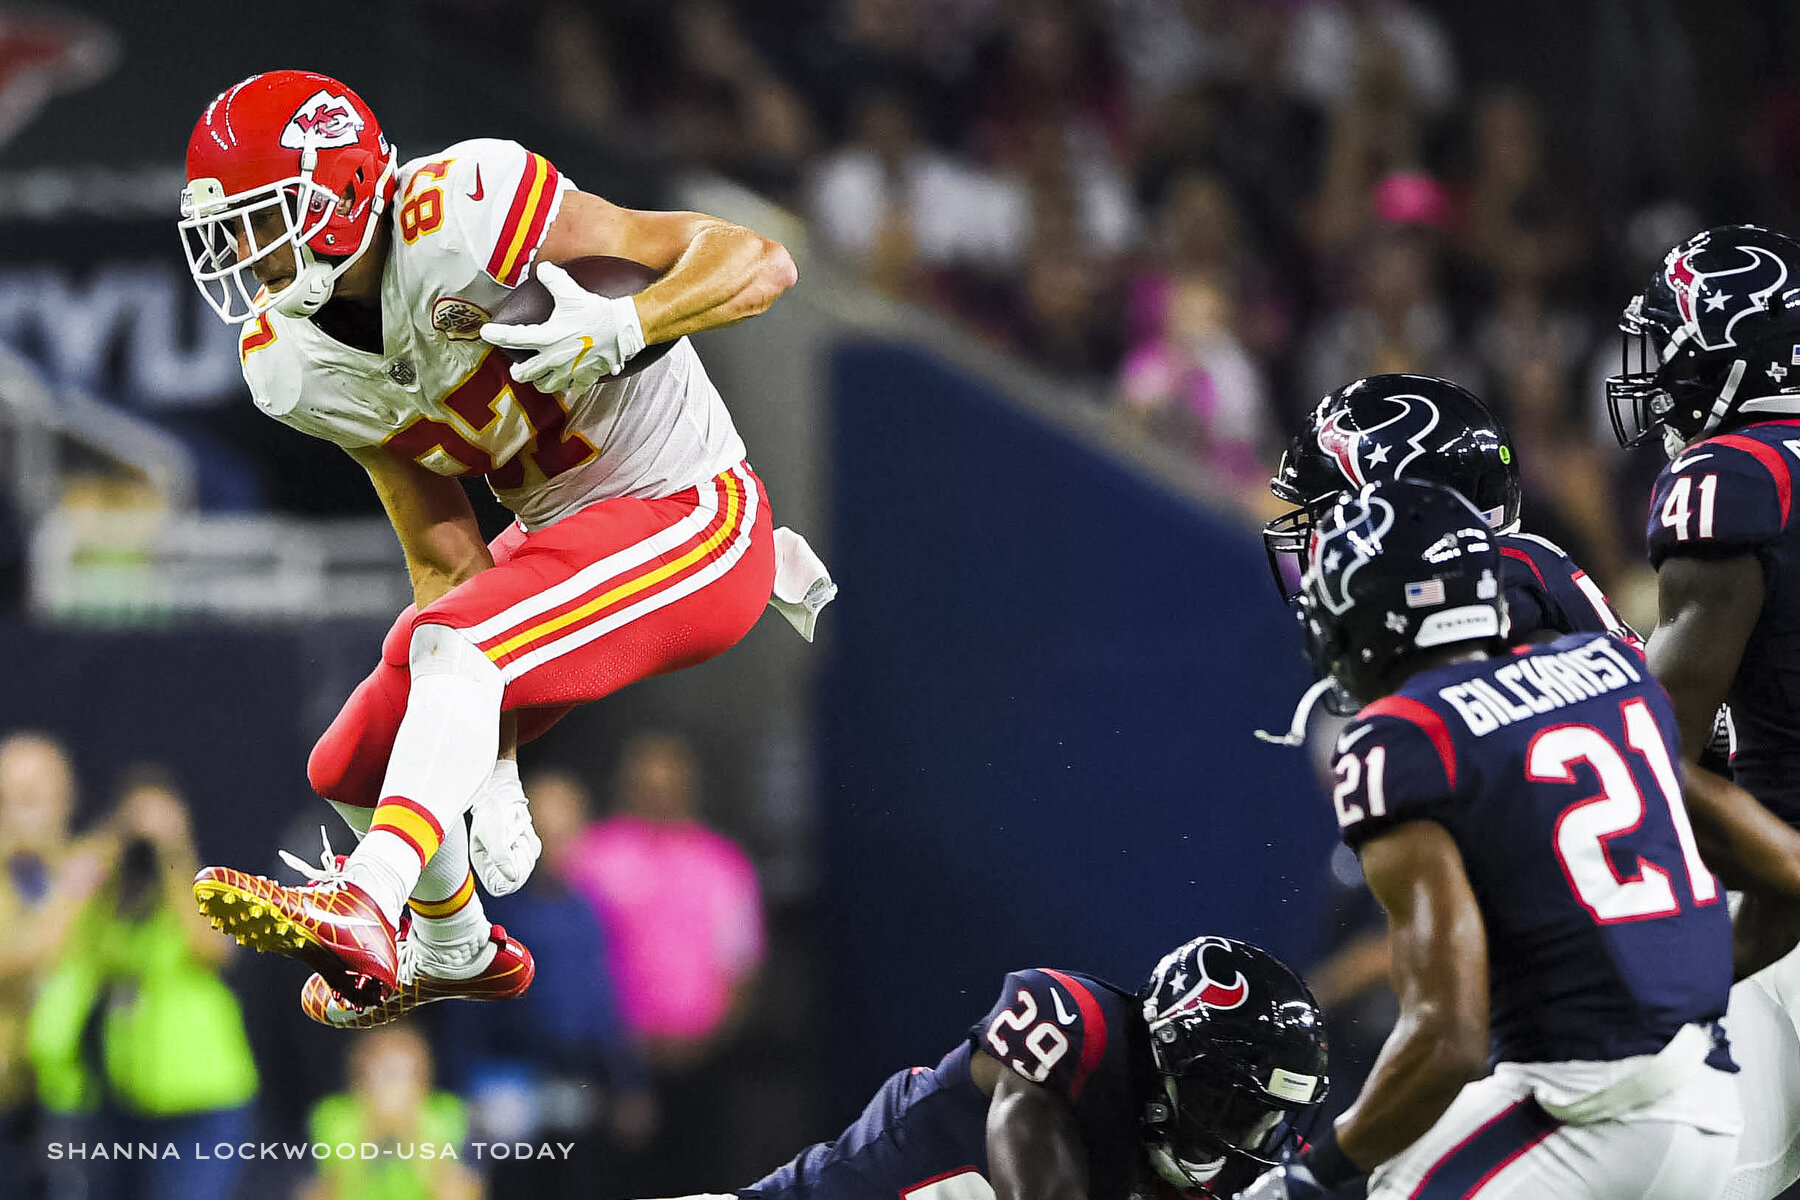  Oct 8, 2017; Houston, TX, USA; Kansas City Chiefs tight end Travis Kelce (87) jumps over Houston Texans free safety Andre Hal (29) during the first quarter at NRG Stadium. Mandatory Credit: Shanna Lockwood-USA TODAY Sports 